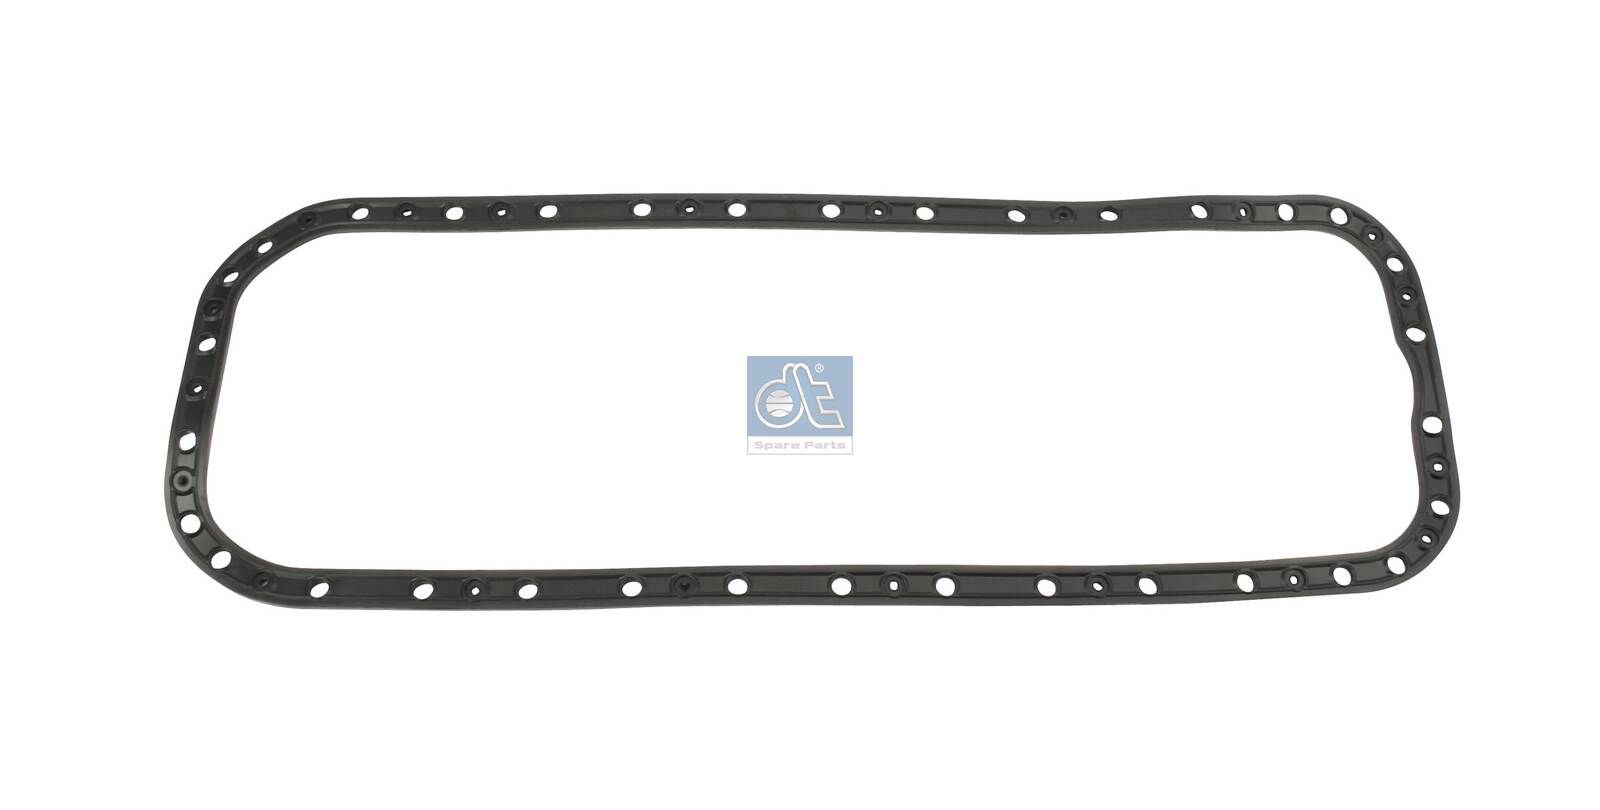 2.11017, Gasket, oil sump, DT Spare Parts, 420941, 038.148, 103244, 25805.15, 395.430, 70-34848-00, 81683, EPL-941, 25808.15LMA, 71-34848-00, 81683DPH